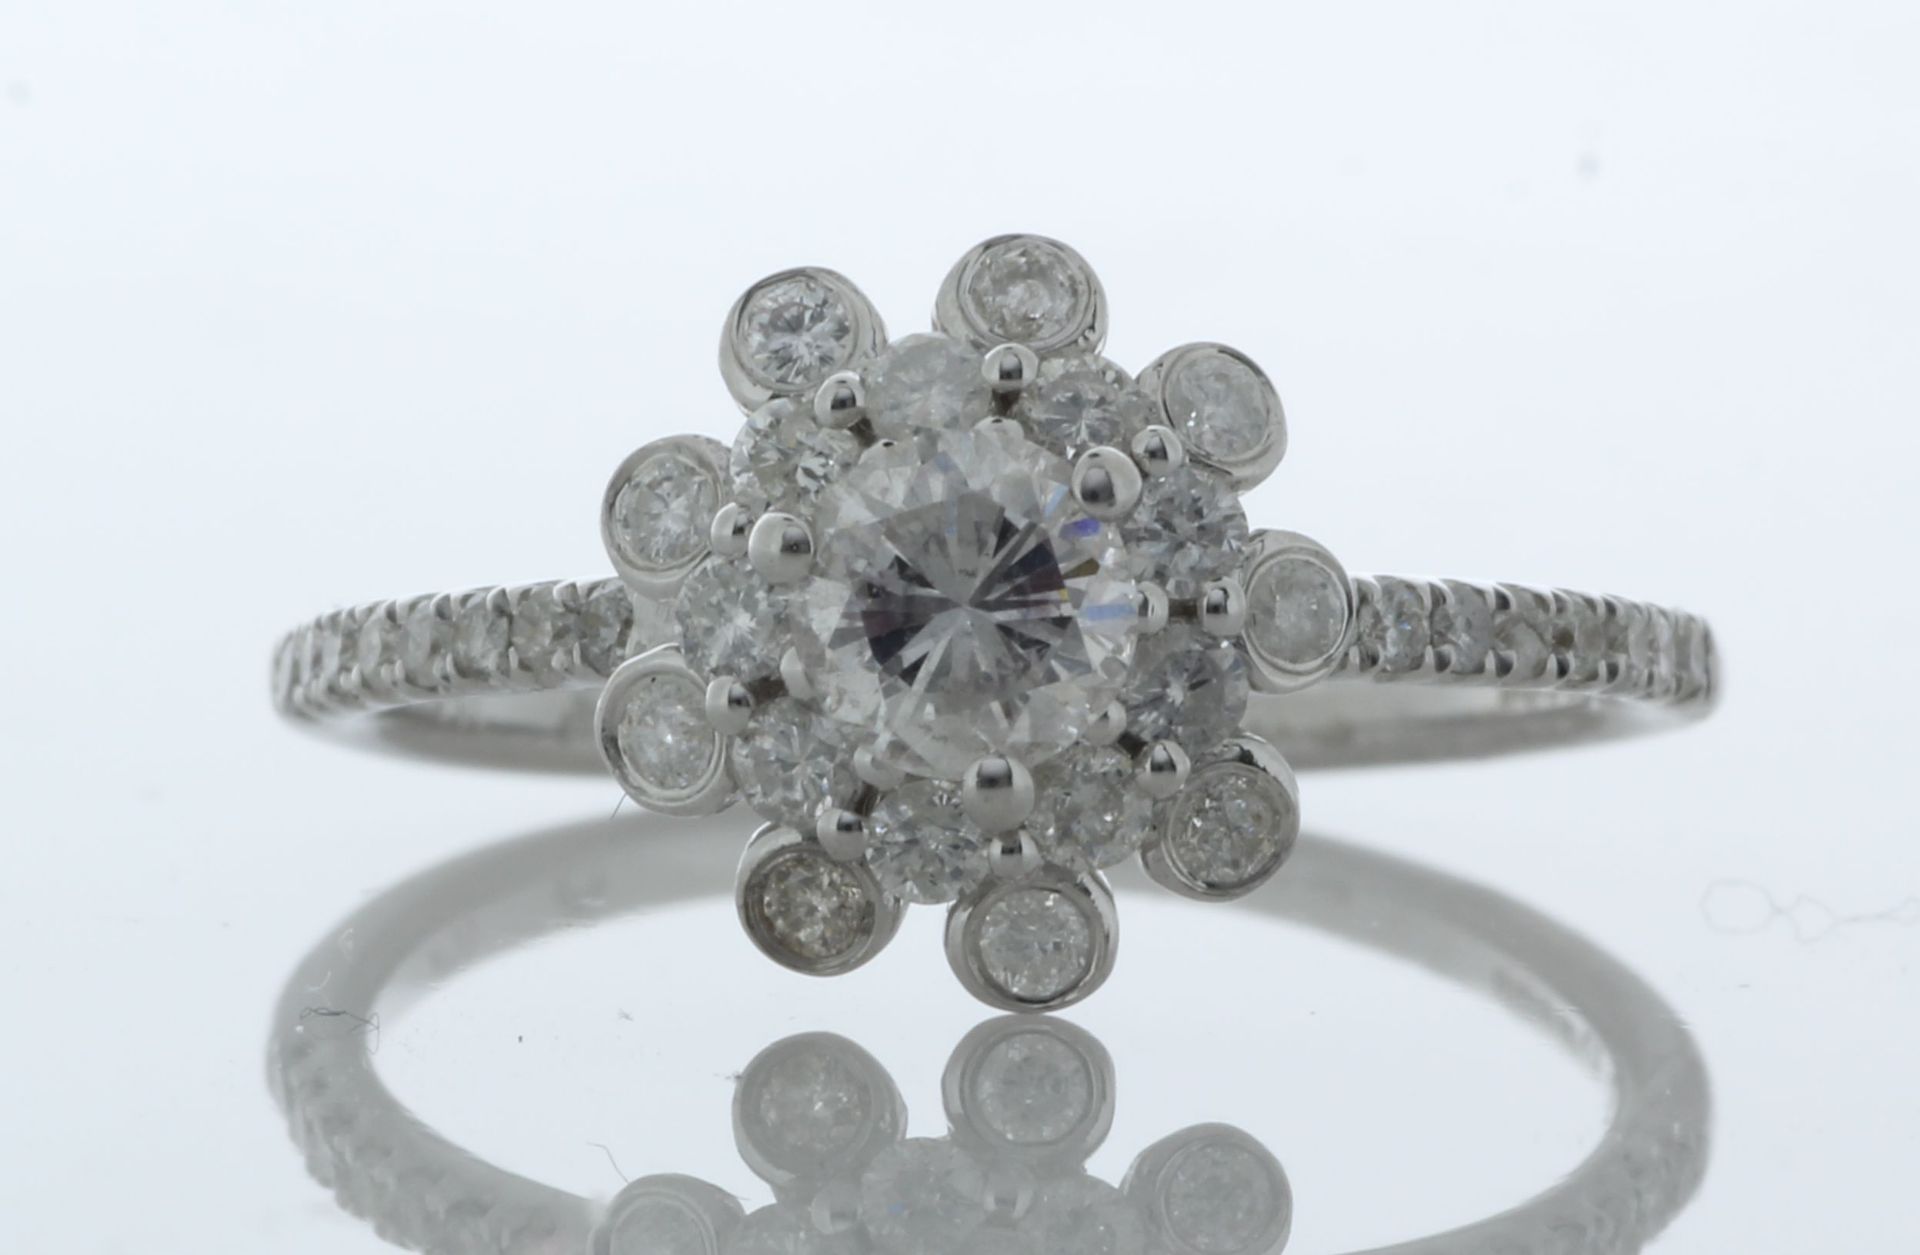 18ct White Gold Flower Halo Diamond Ring 0.76 Carats - Valued By GIE £6,415.00 - One natural round